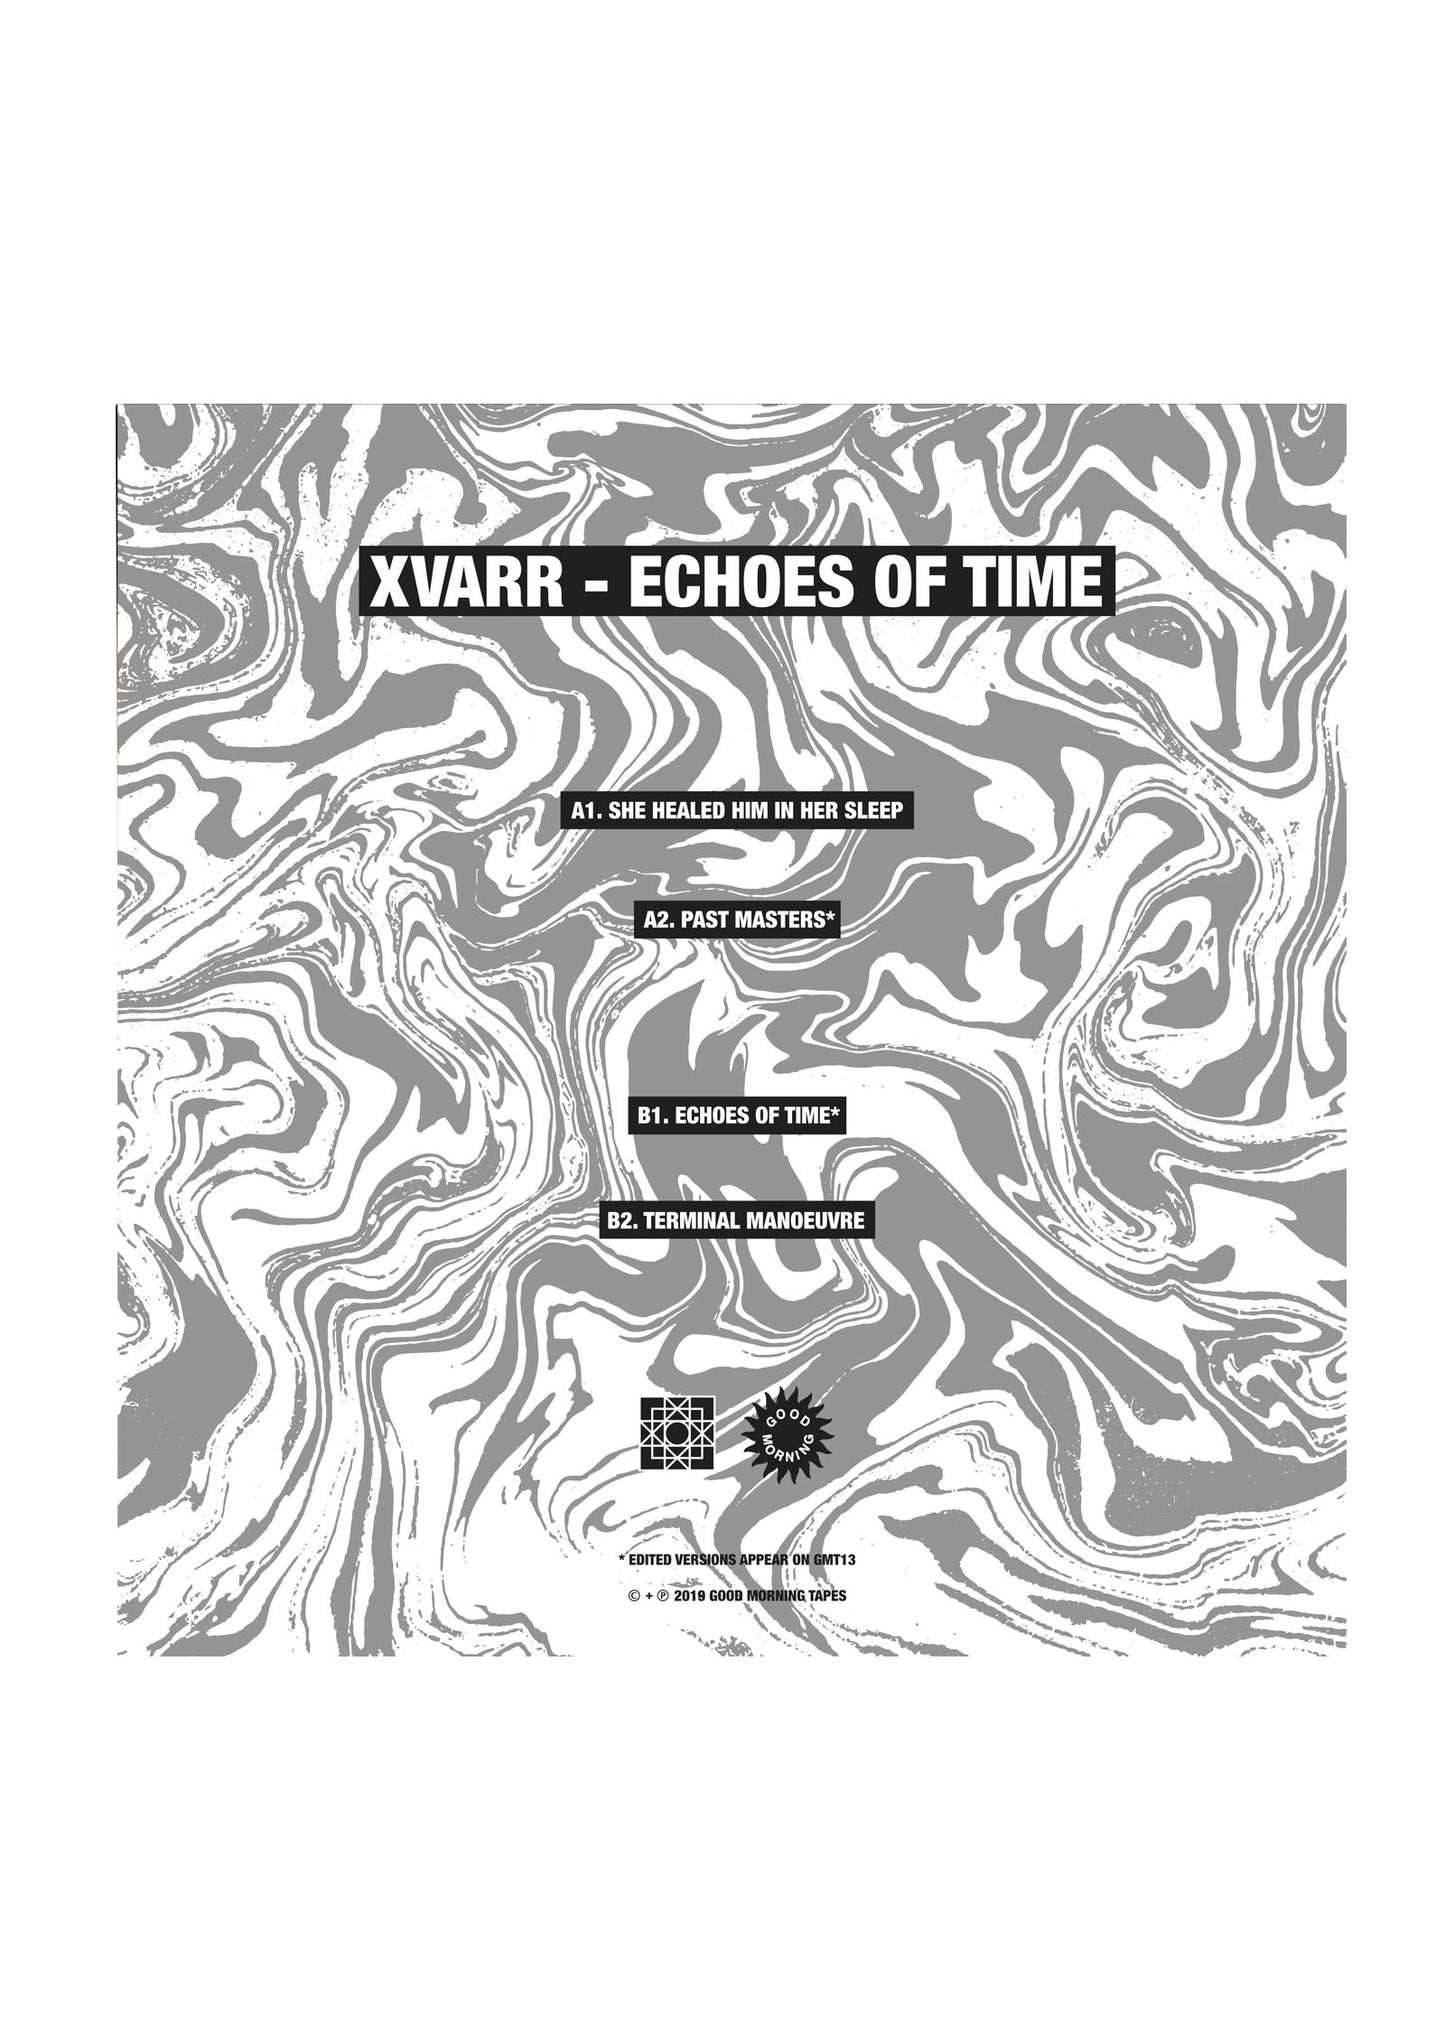 GMV02 XVARR - ECHOES OF TIME 12"